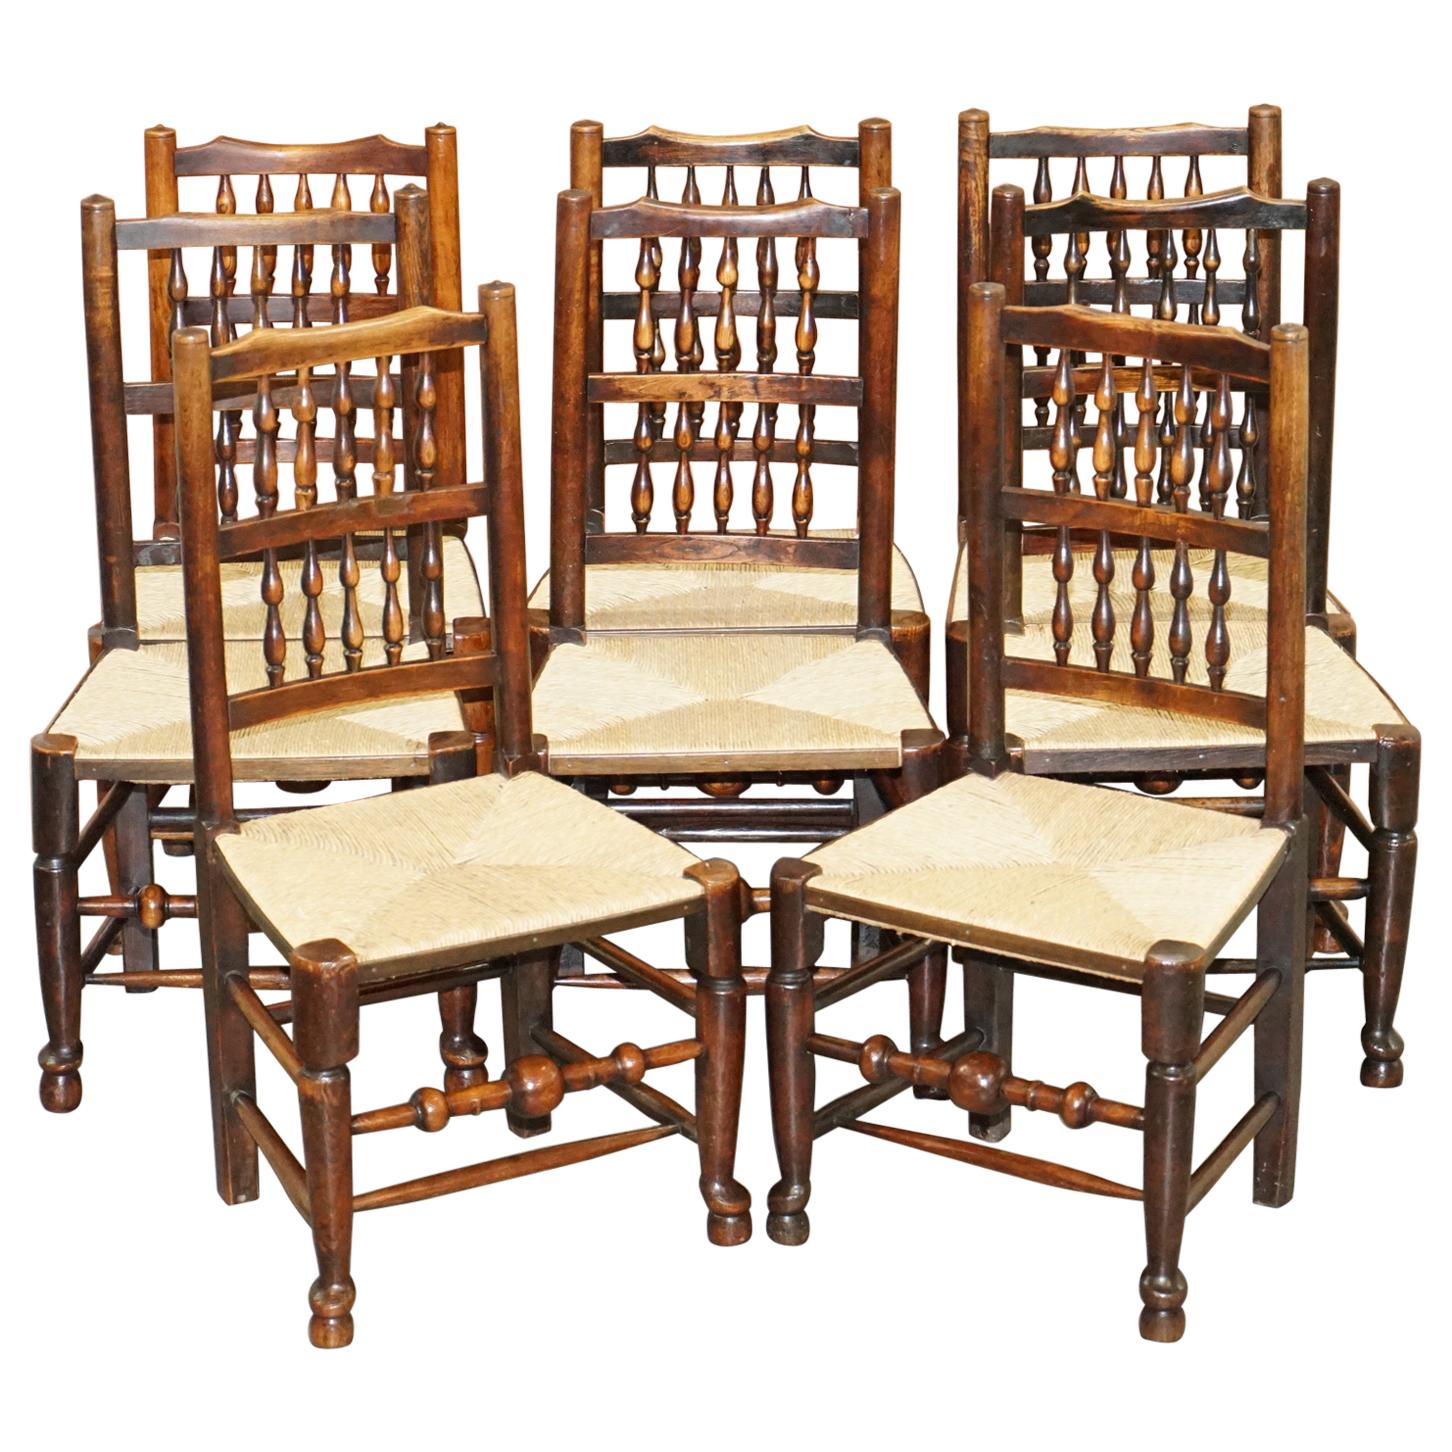 Lovely Suite of Eight circa 1860 Dutch Ladder Back Elm Rush Seat Dining Chairs